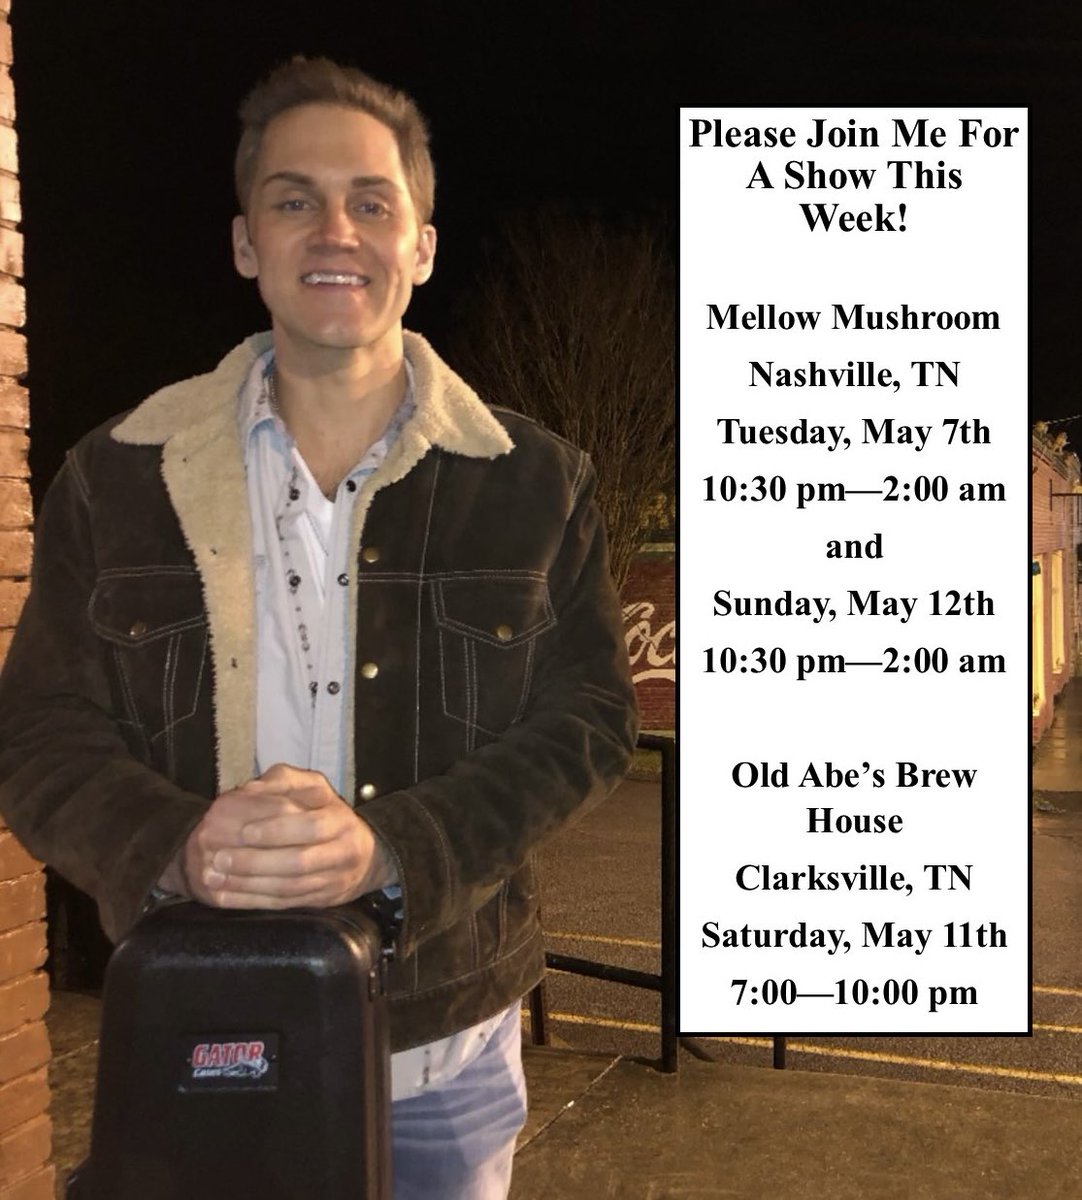 I’m looking forward to the shows this week! Please join me for great live music and a fun time! 😀🎸
#douglasriley #douglasrileymusic #singersongwriter #nashvilletn #indieartist #originalmusic #clarksvilletn #livemusic #countrymusic #spotifyartist #countrymusicartist